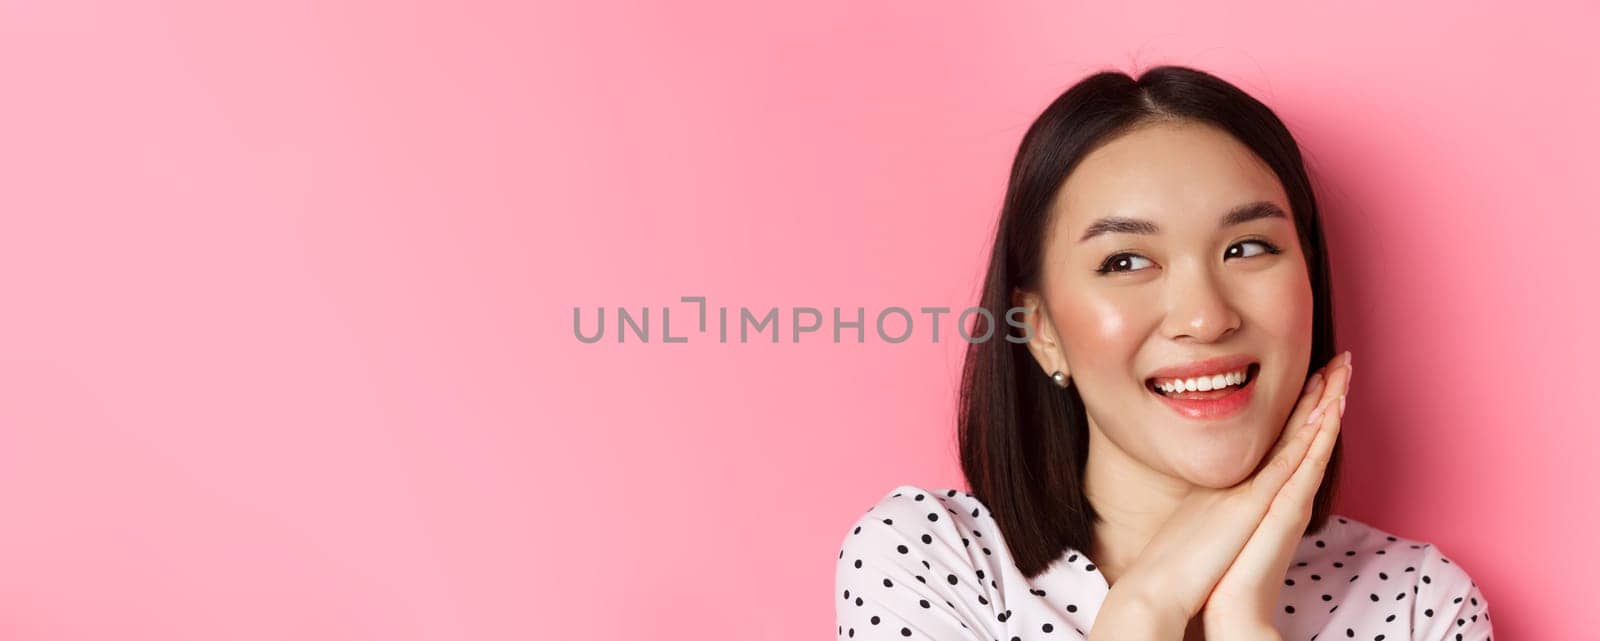 Beauty and skin care concept. Headshot of adorable and dreamy asian woman looking left, smiling and imaging, standing against pink background.